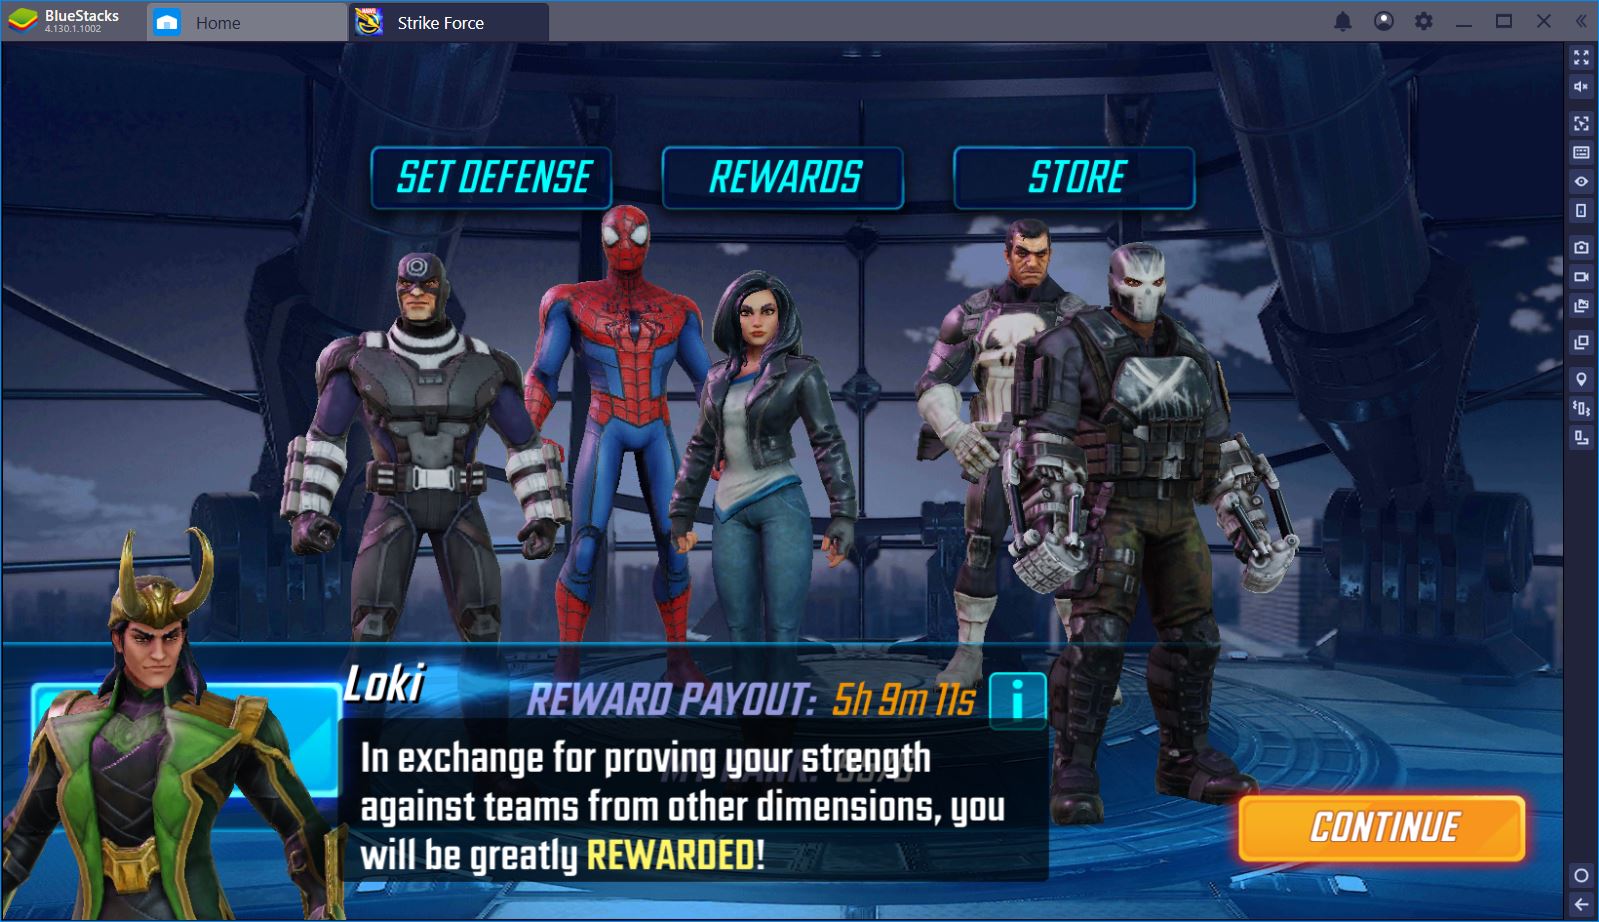 PROMO CODES WORK - Free stuff for some - MARVEL Strike Force - MSF 